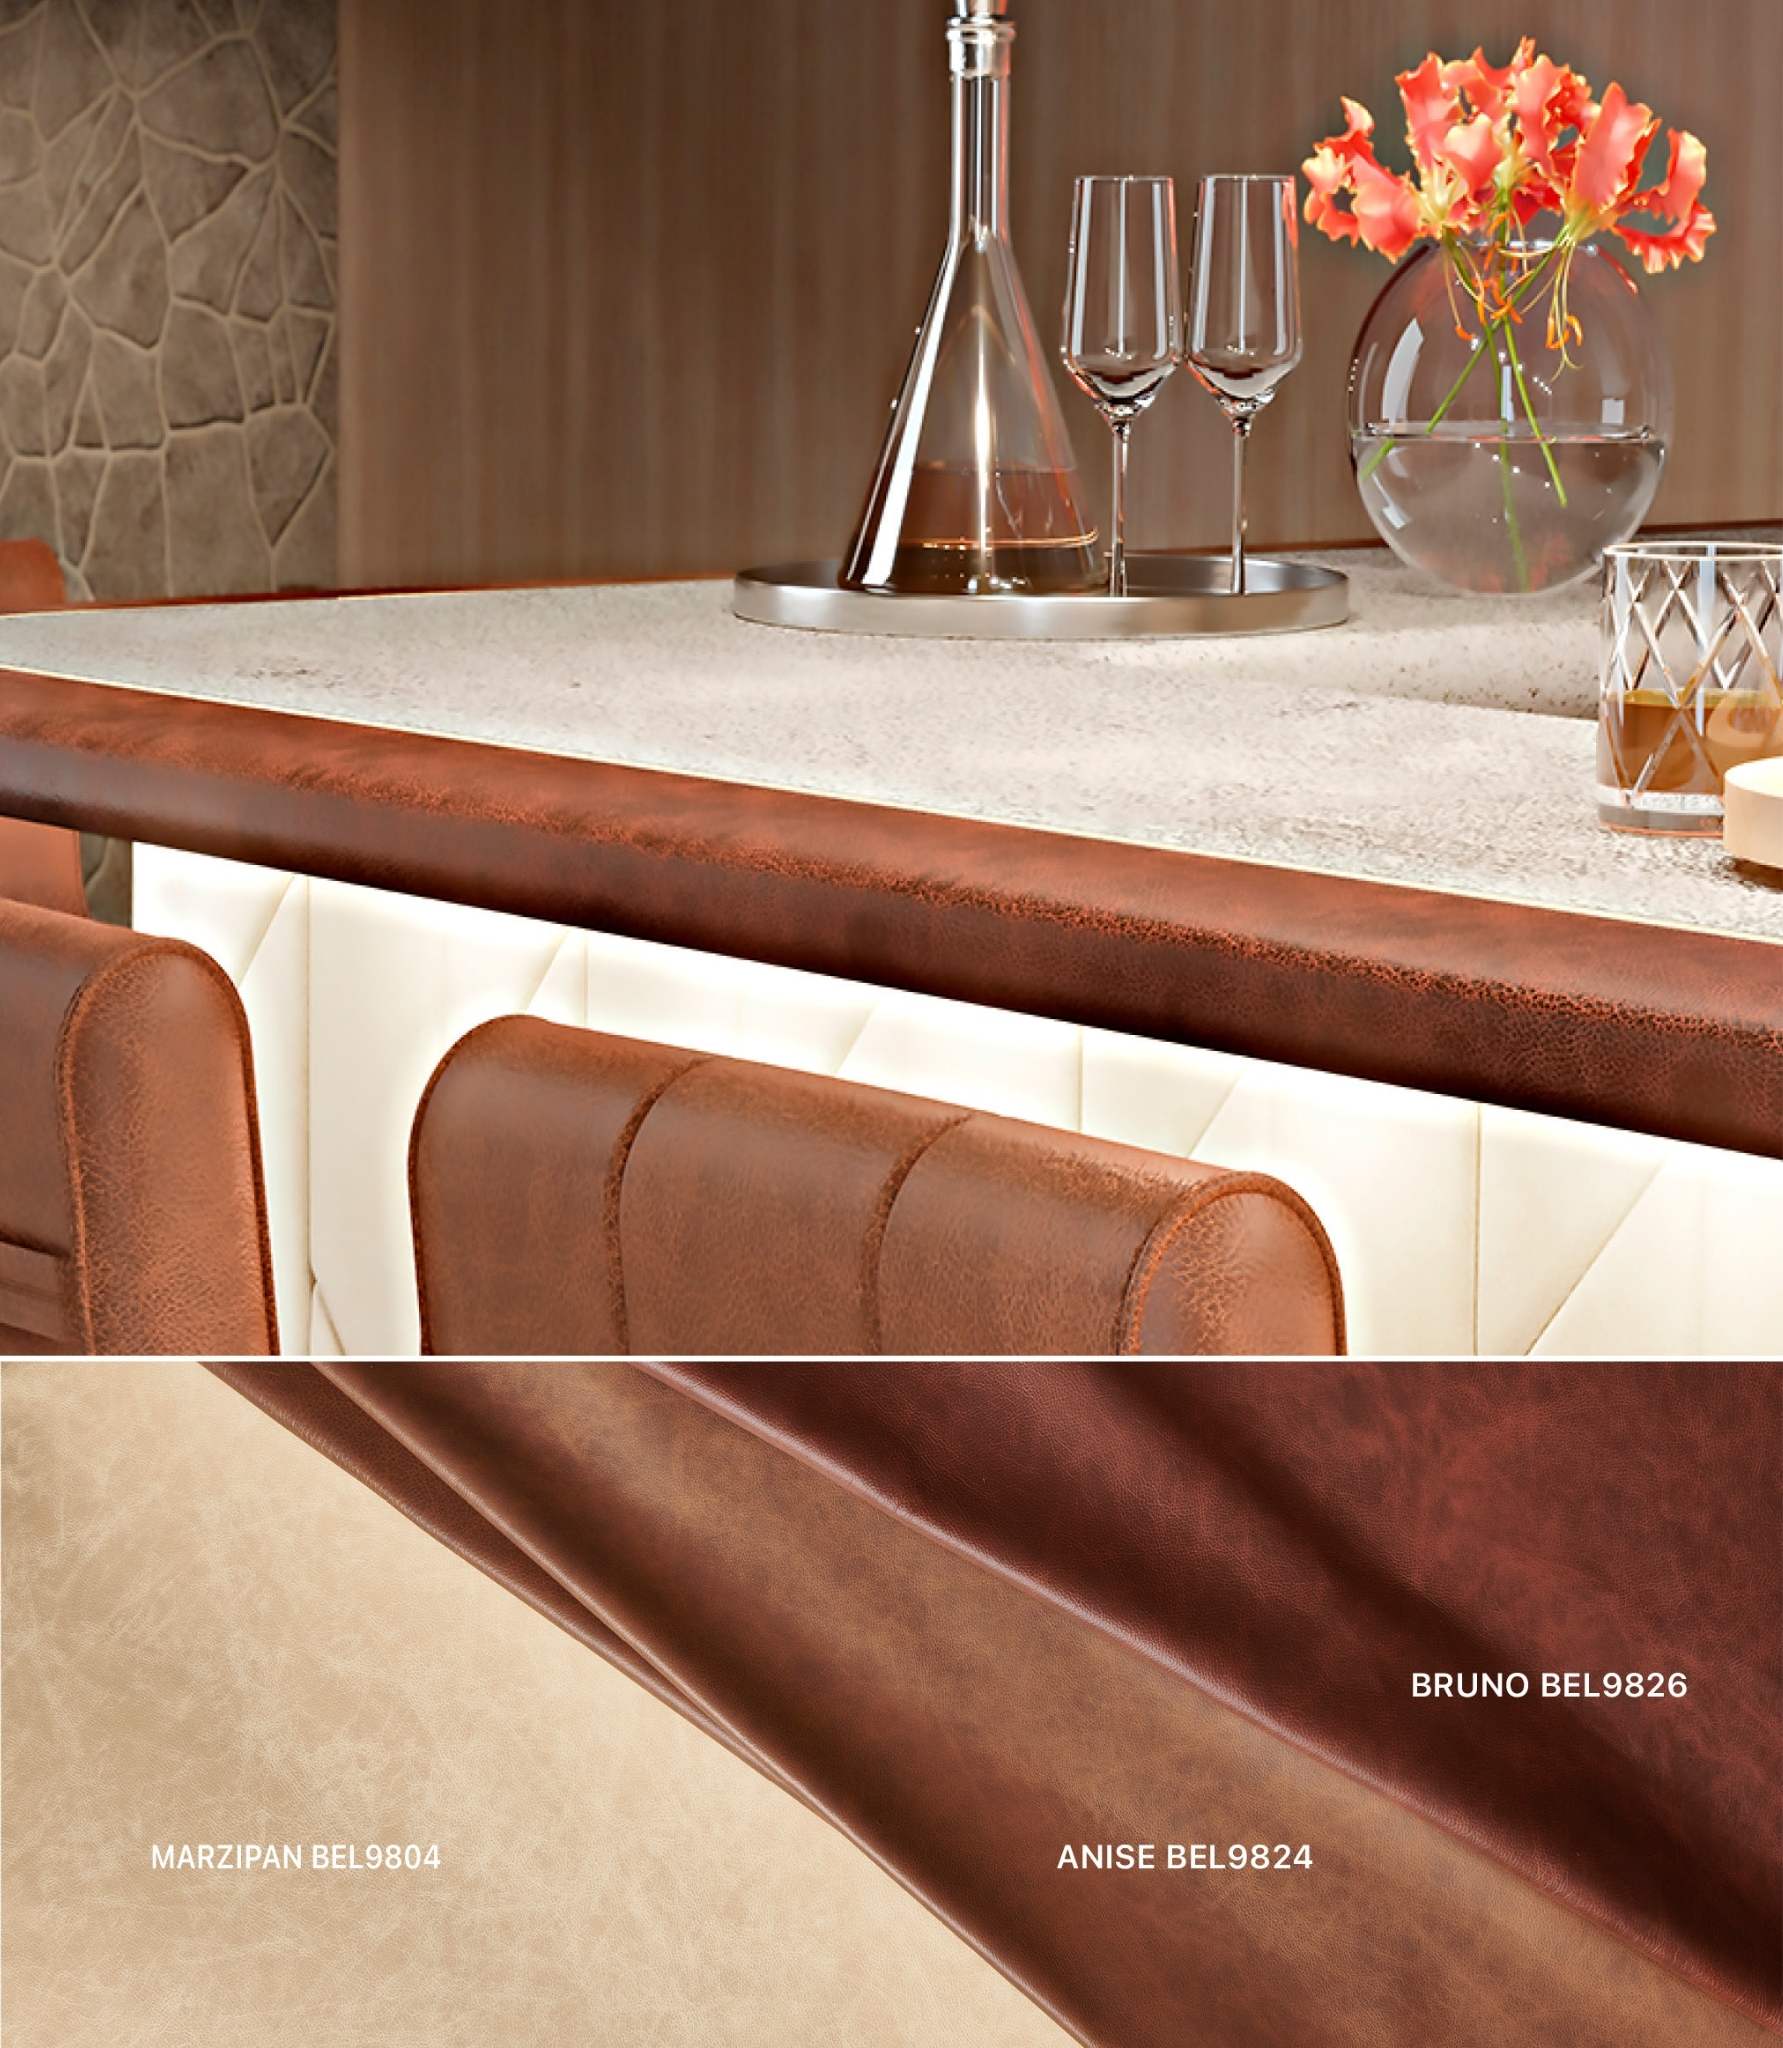 leather, A New Collection of Distressed Italian Leather with a Scratch-Resistant Finish